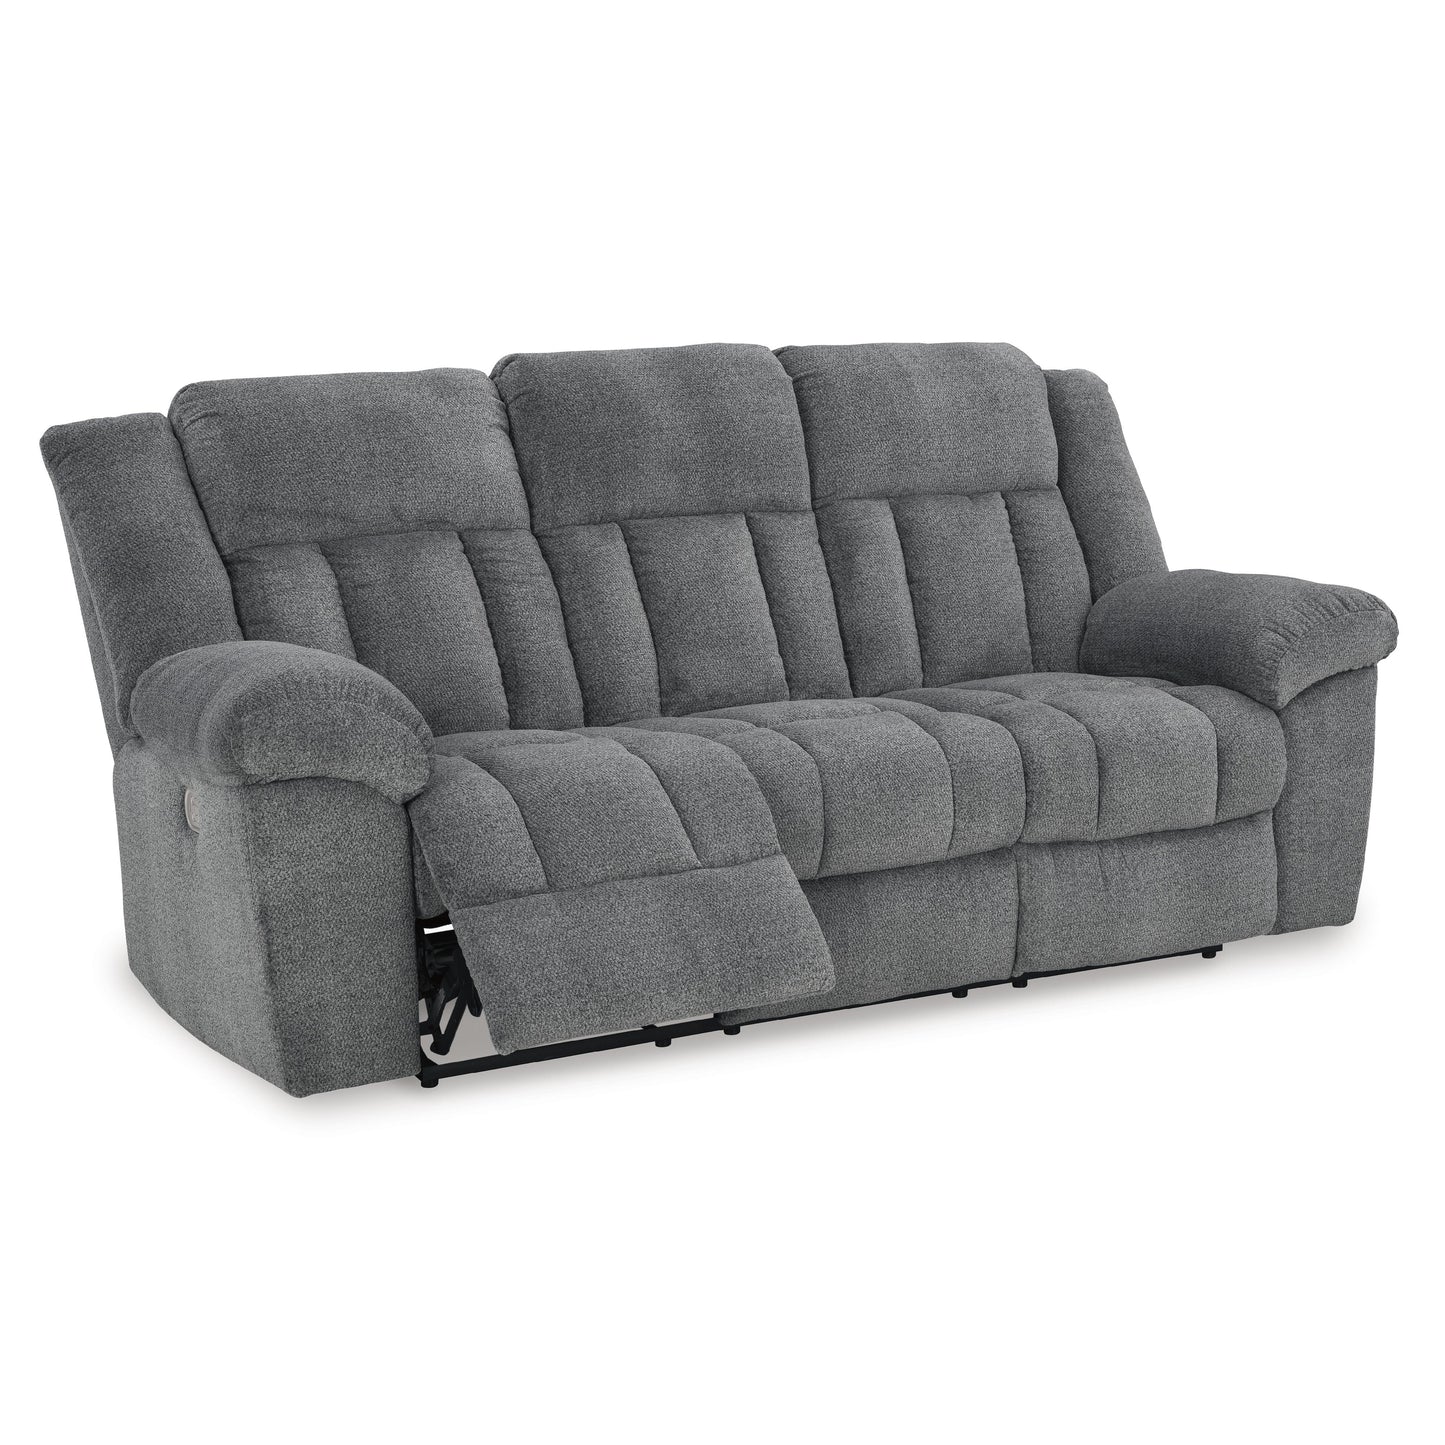 Signature Design by Ashley Tip-Off Power Reclining Sofa 6930415 IMAGE 2